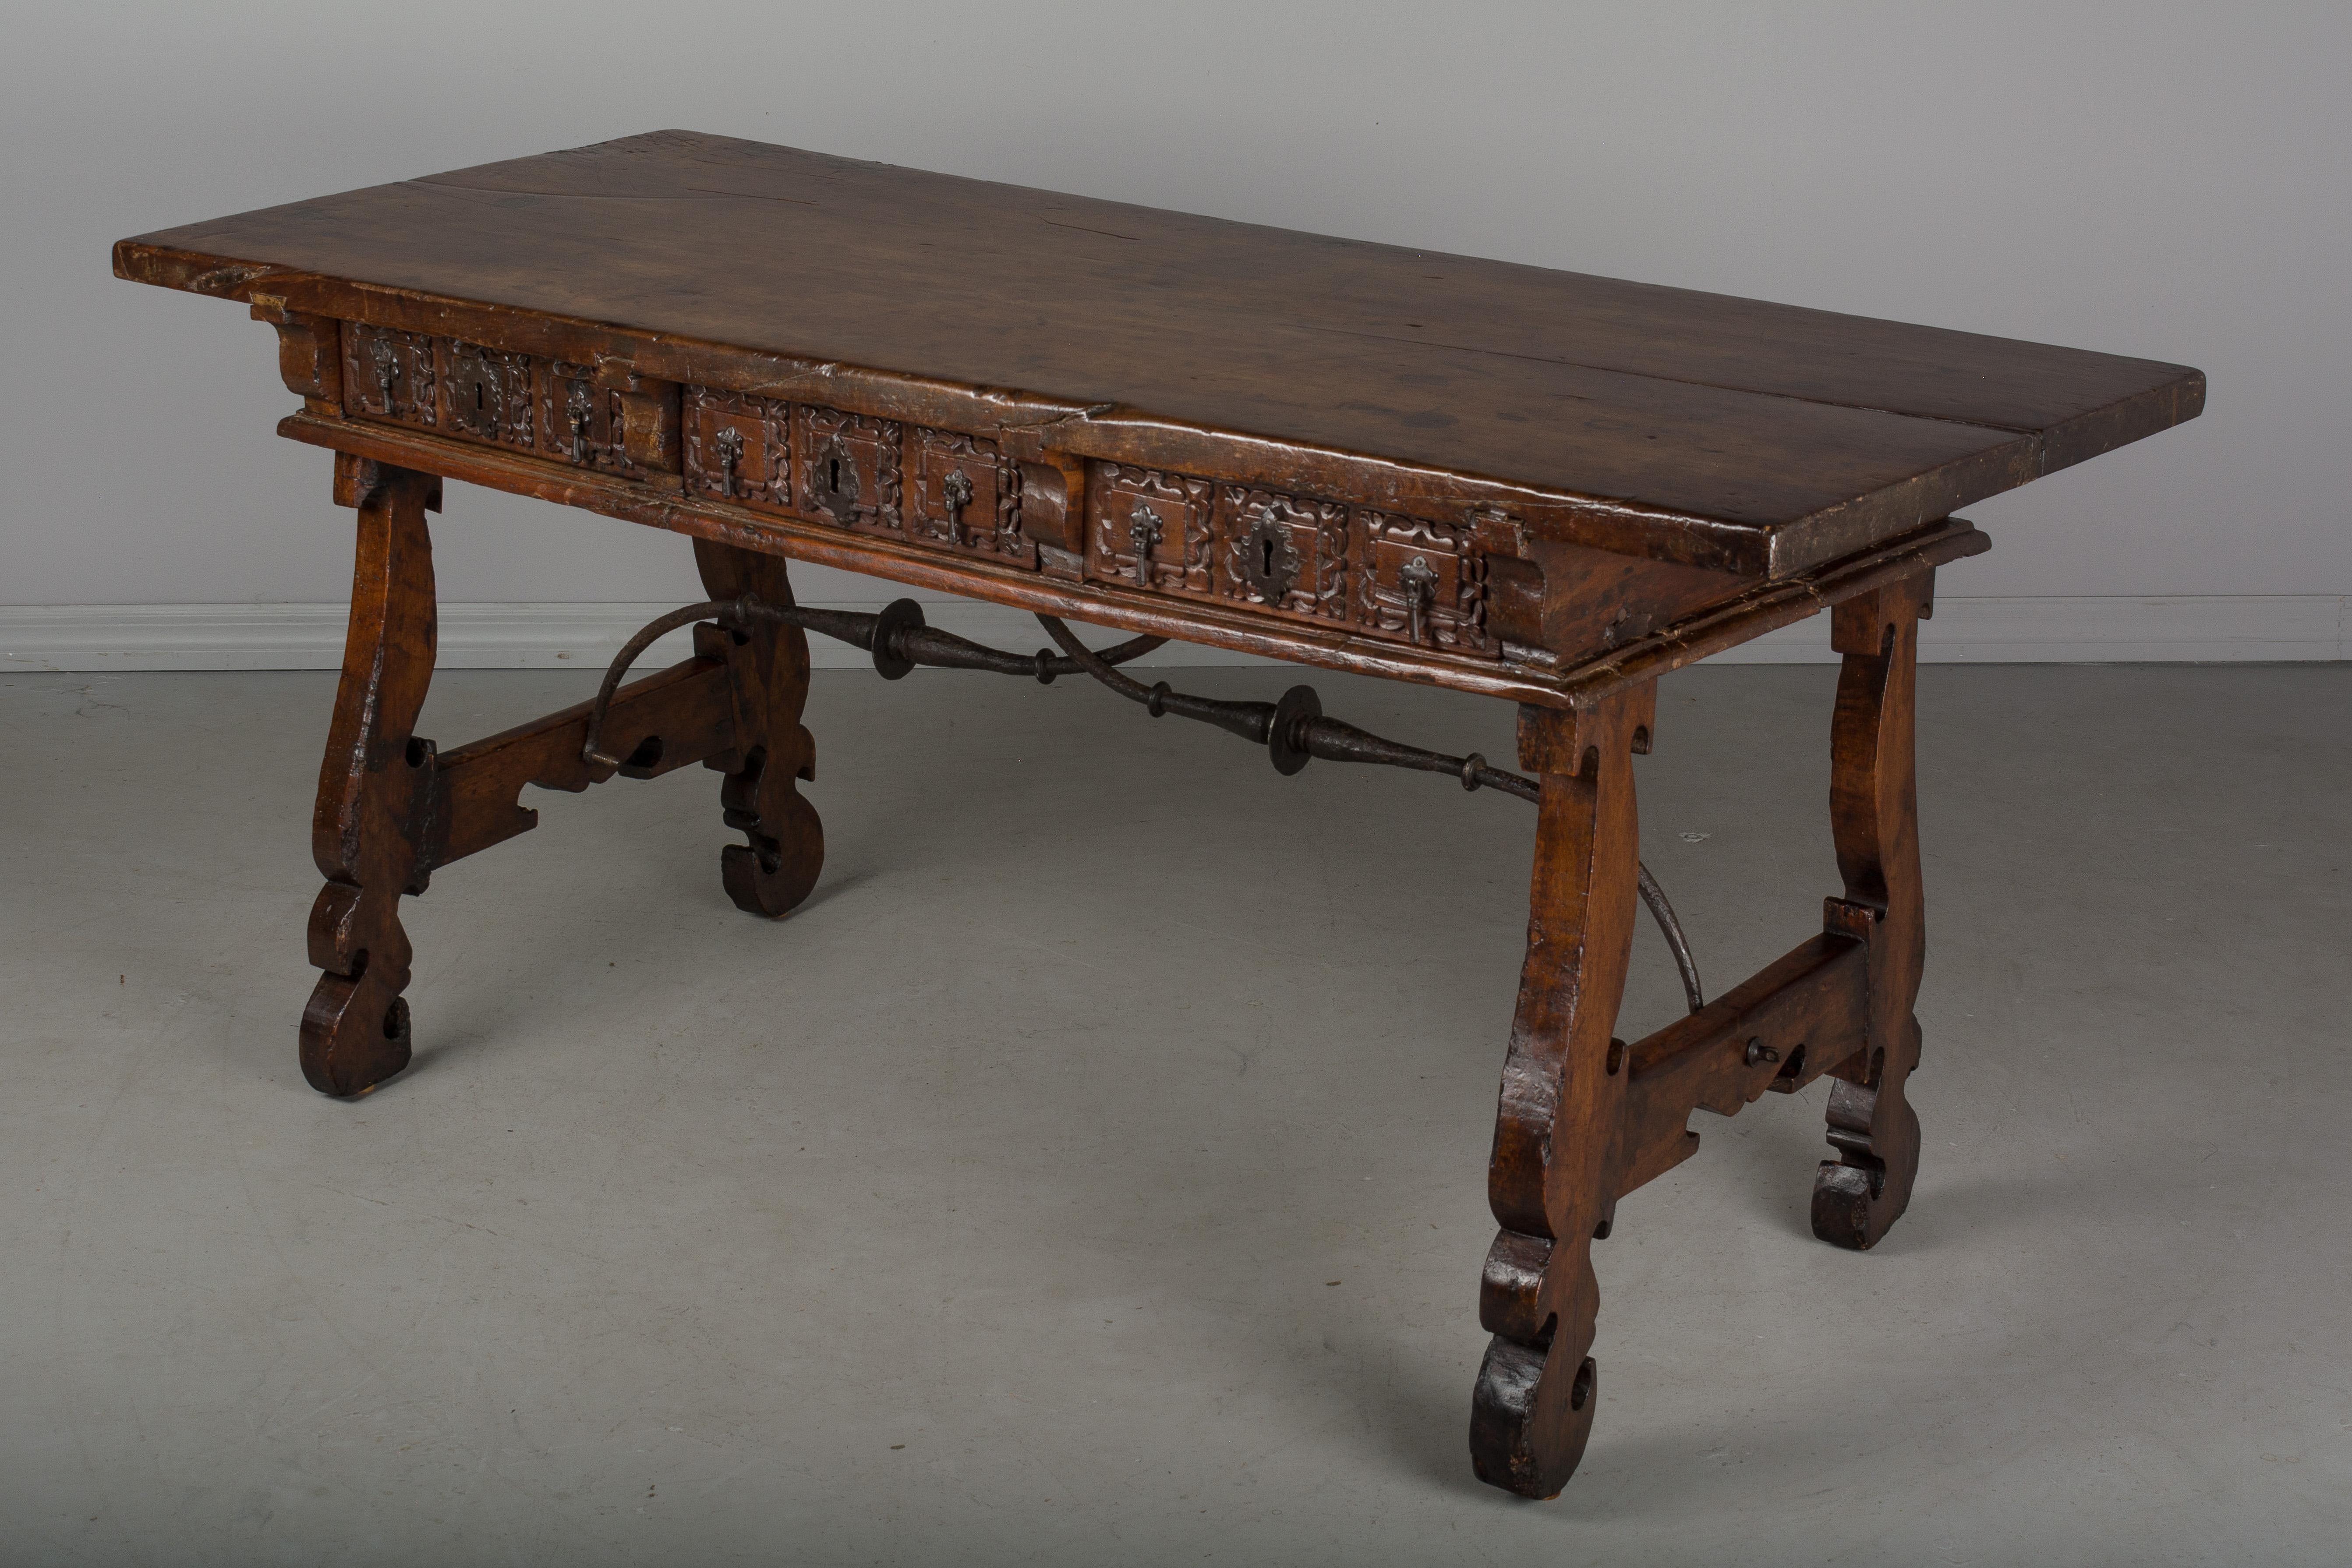 An 18th century Spanish Baroque desk, or writing table made of solid walnut with lyre shaped legs joined by wrought iron stretchers. Hand-carved decoration across the front and the back. Three dovetailed drawers with original iron drawer pulls and